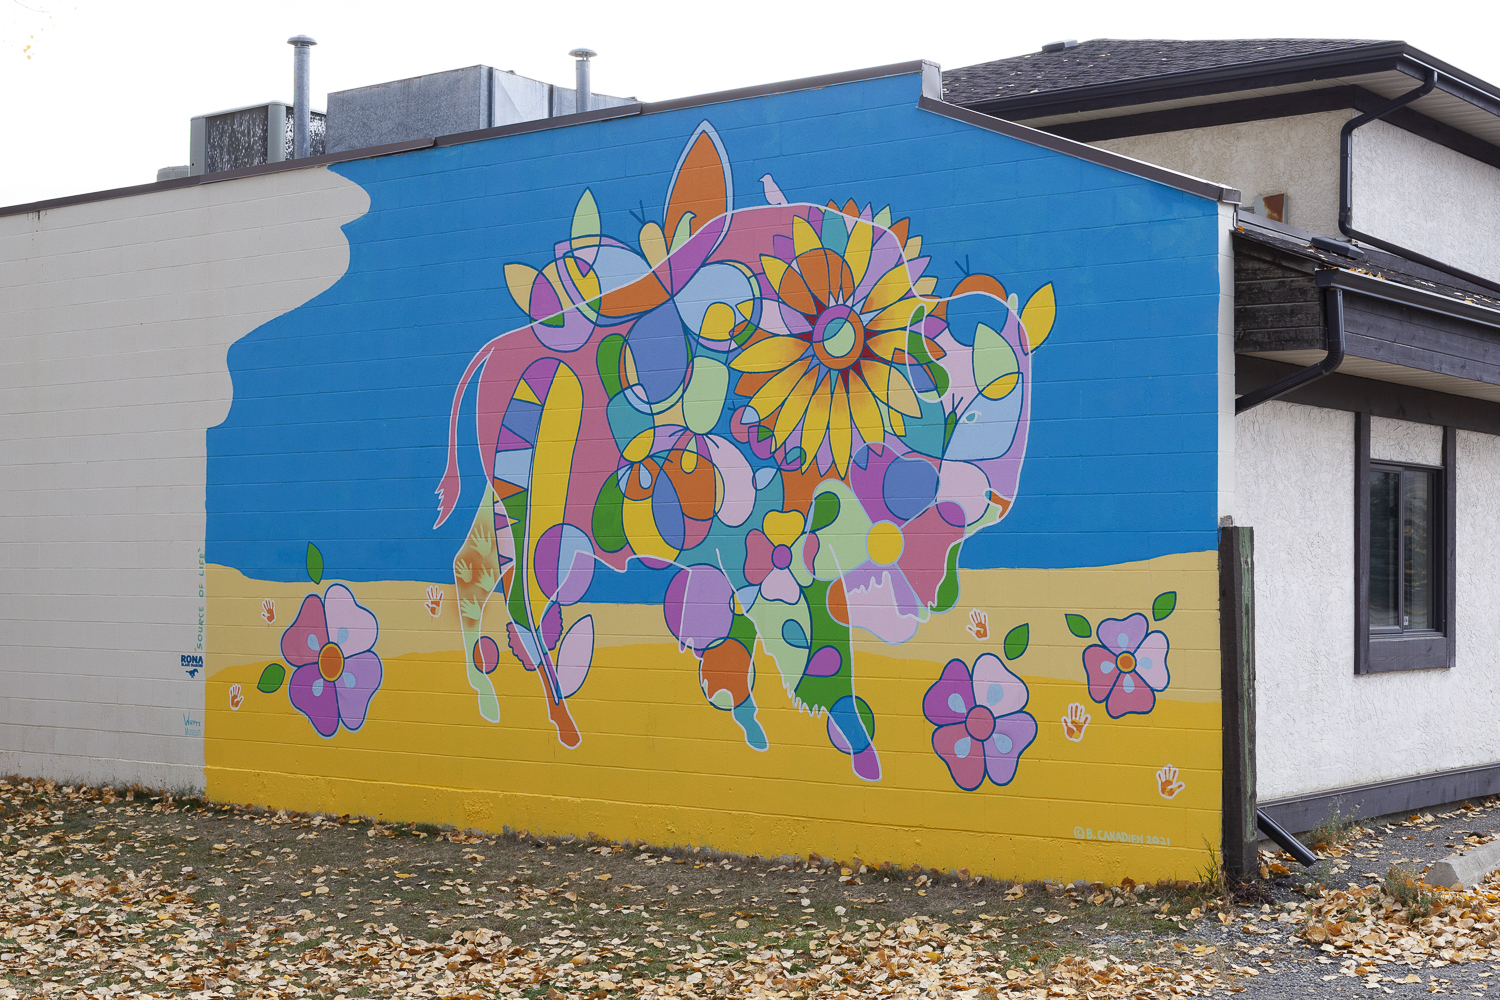 ID6: Photo of Bruno Canadien’s mural “Source of Life” it is on a brick building. It features geometric shapes and motifs that form a buffalo - there are colours of pink, green, yellow, and purple on a blue background. Part of the overcast sky is showing on the top right corner.